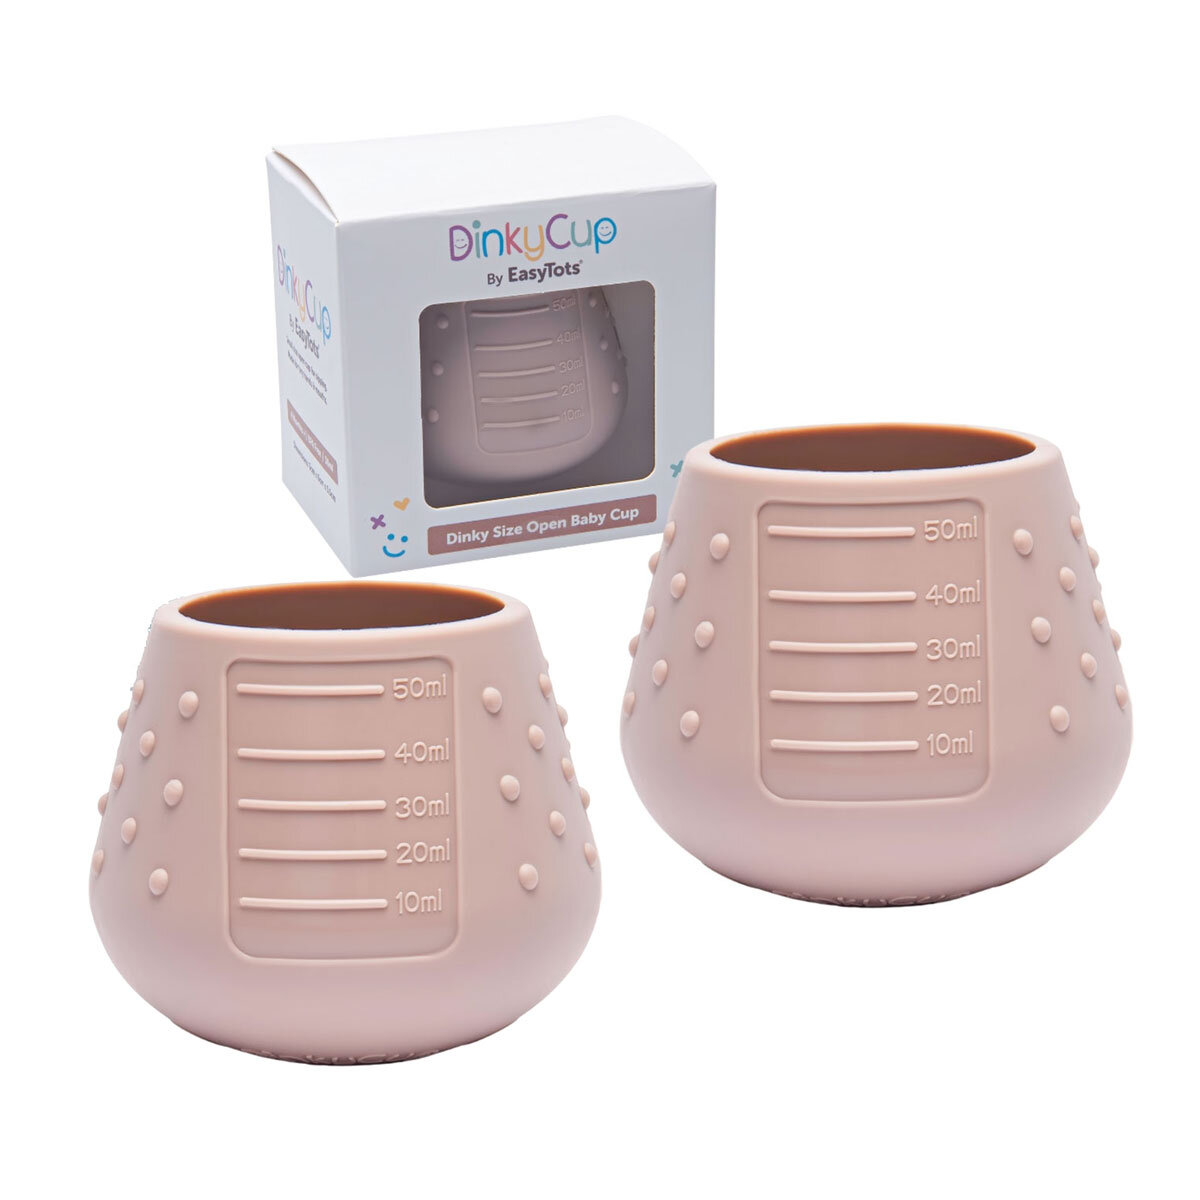 EasyTots Dinky Cup, 2 Pack in Mauve | Costco UK